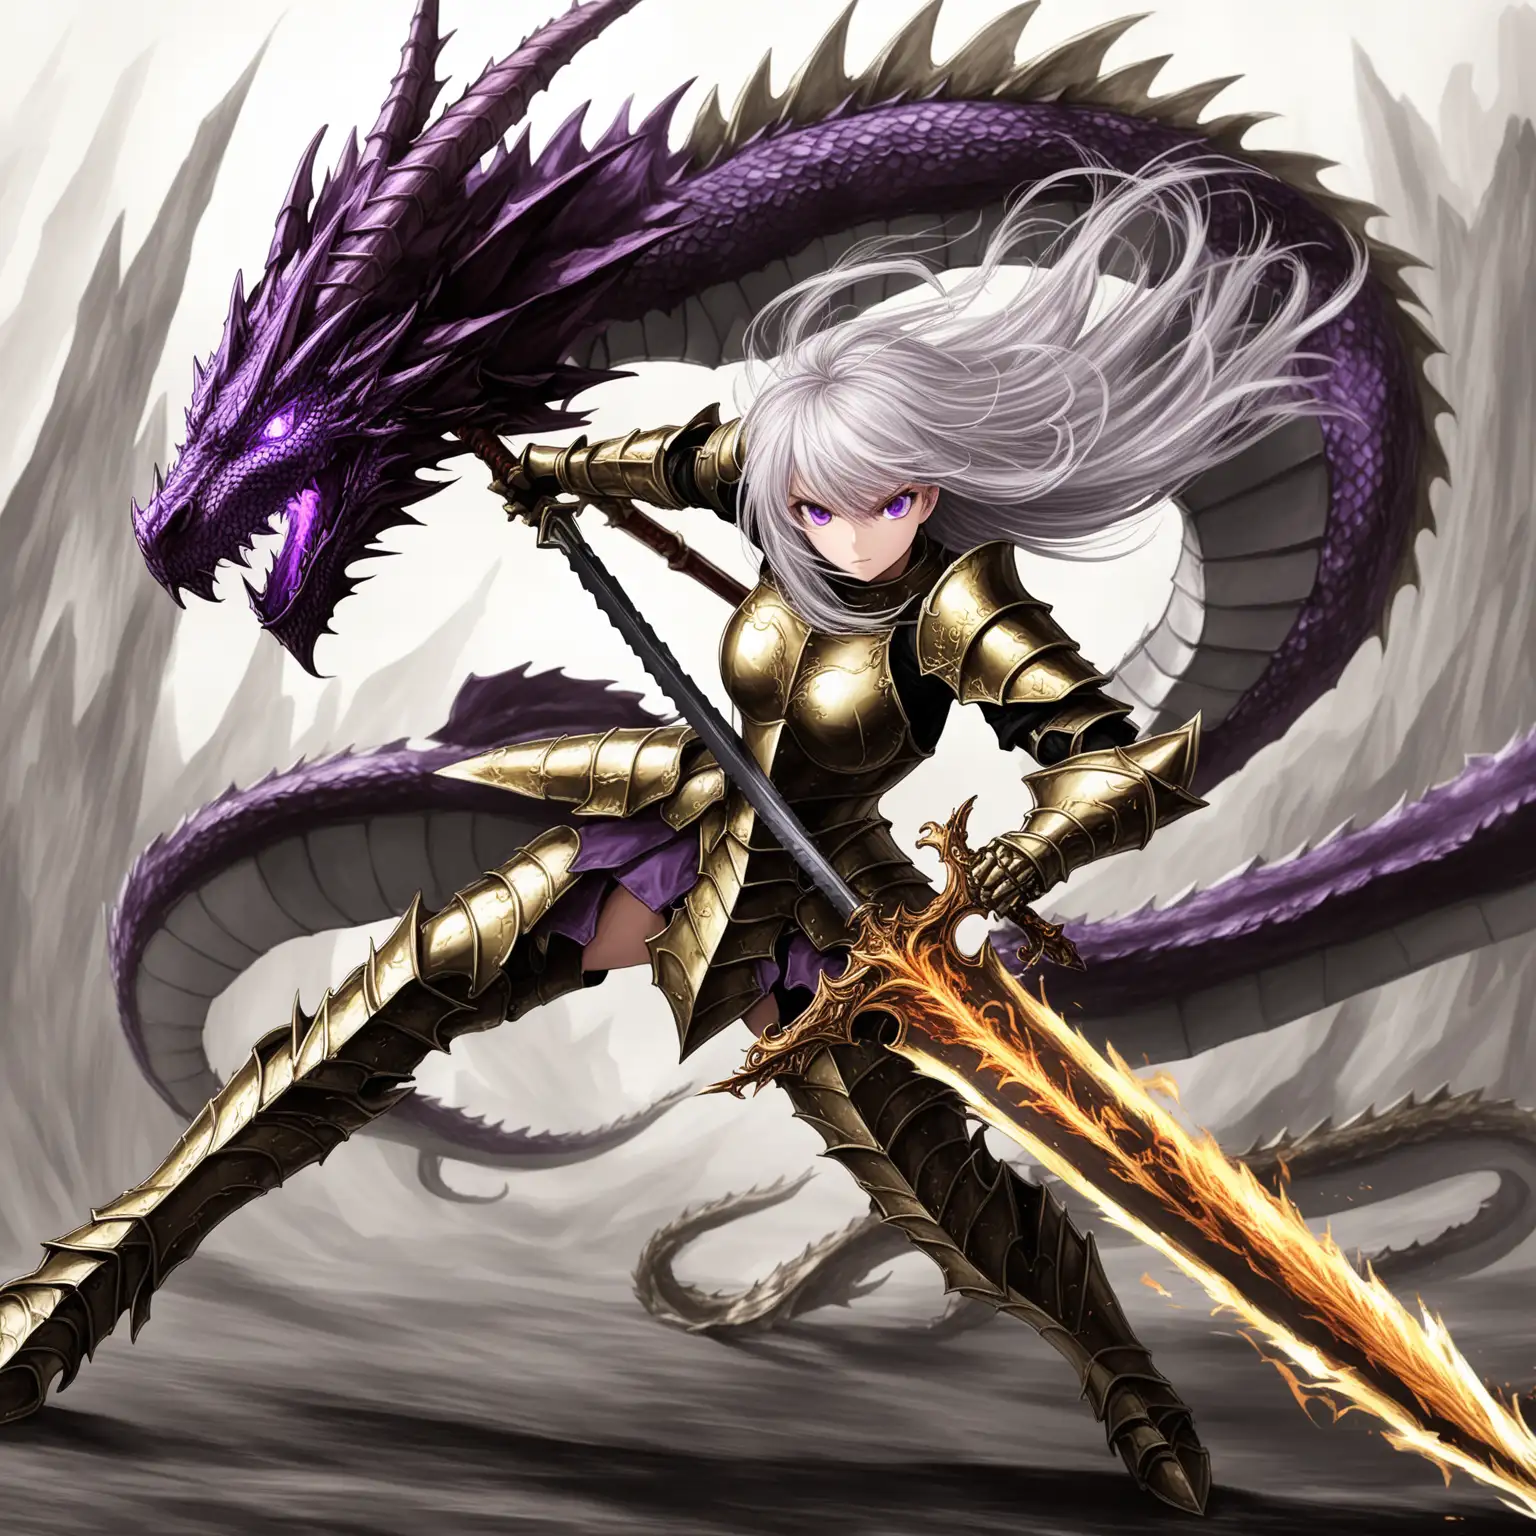 Female Dragon Slayer in Gold and Black Armor with Platinum Hair and Sword